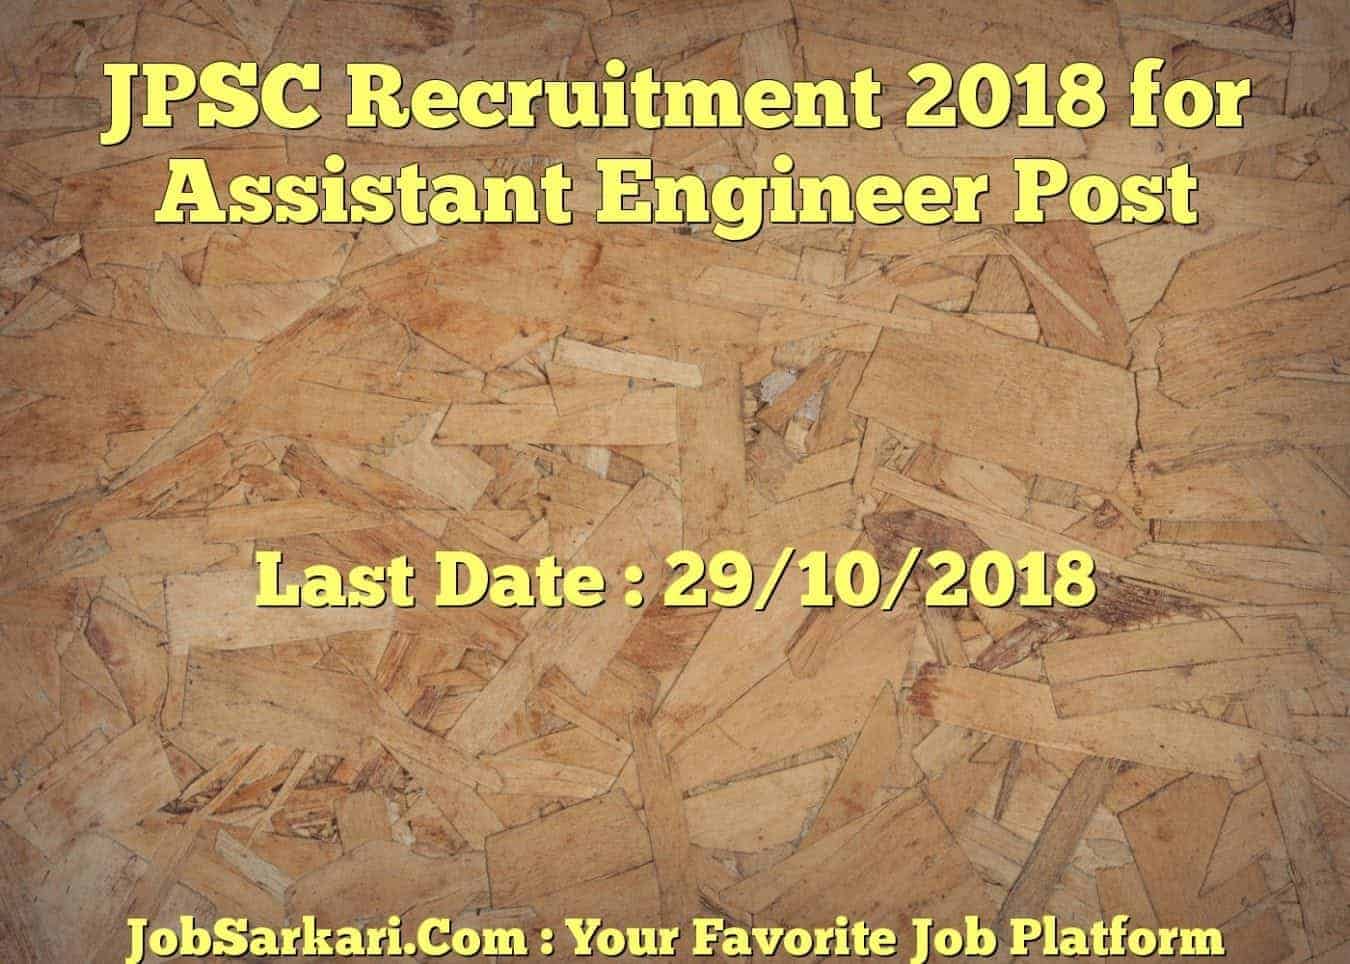 JPSC Recruitment 2018 for Assistant Engineer Post